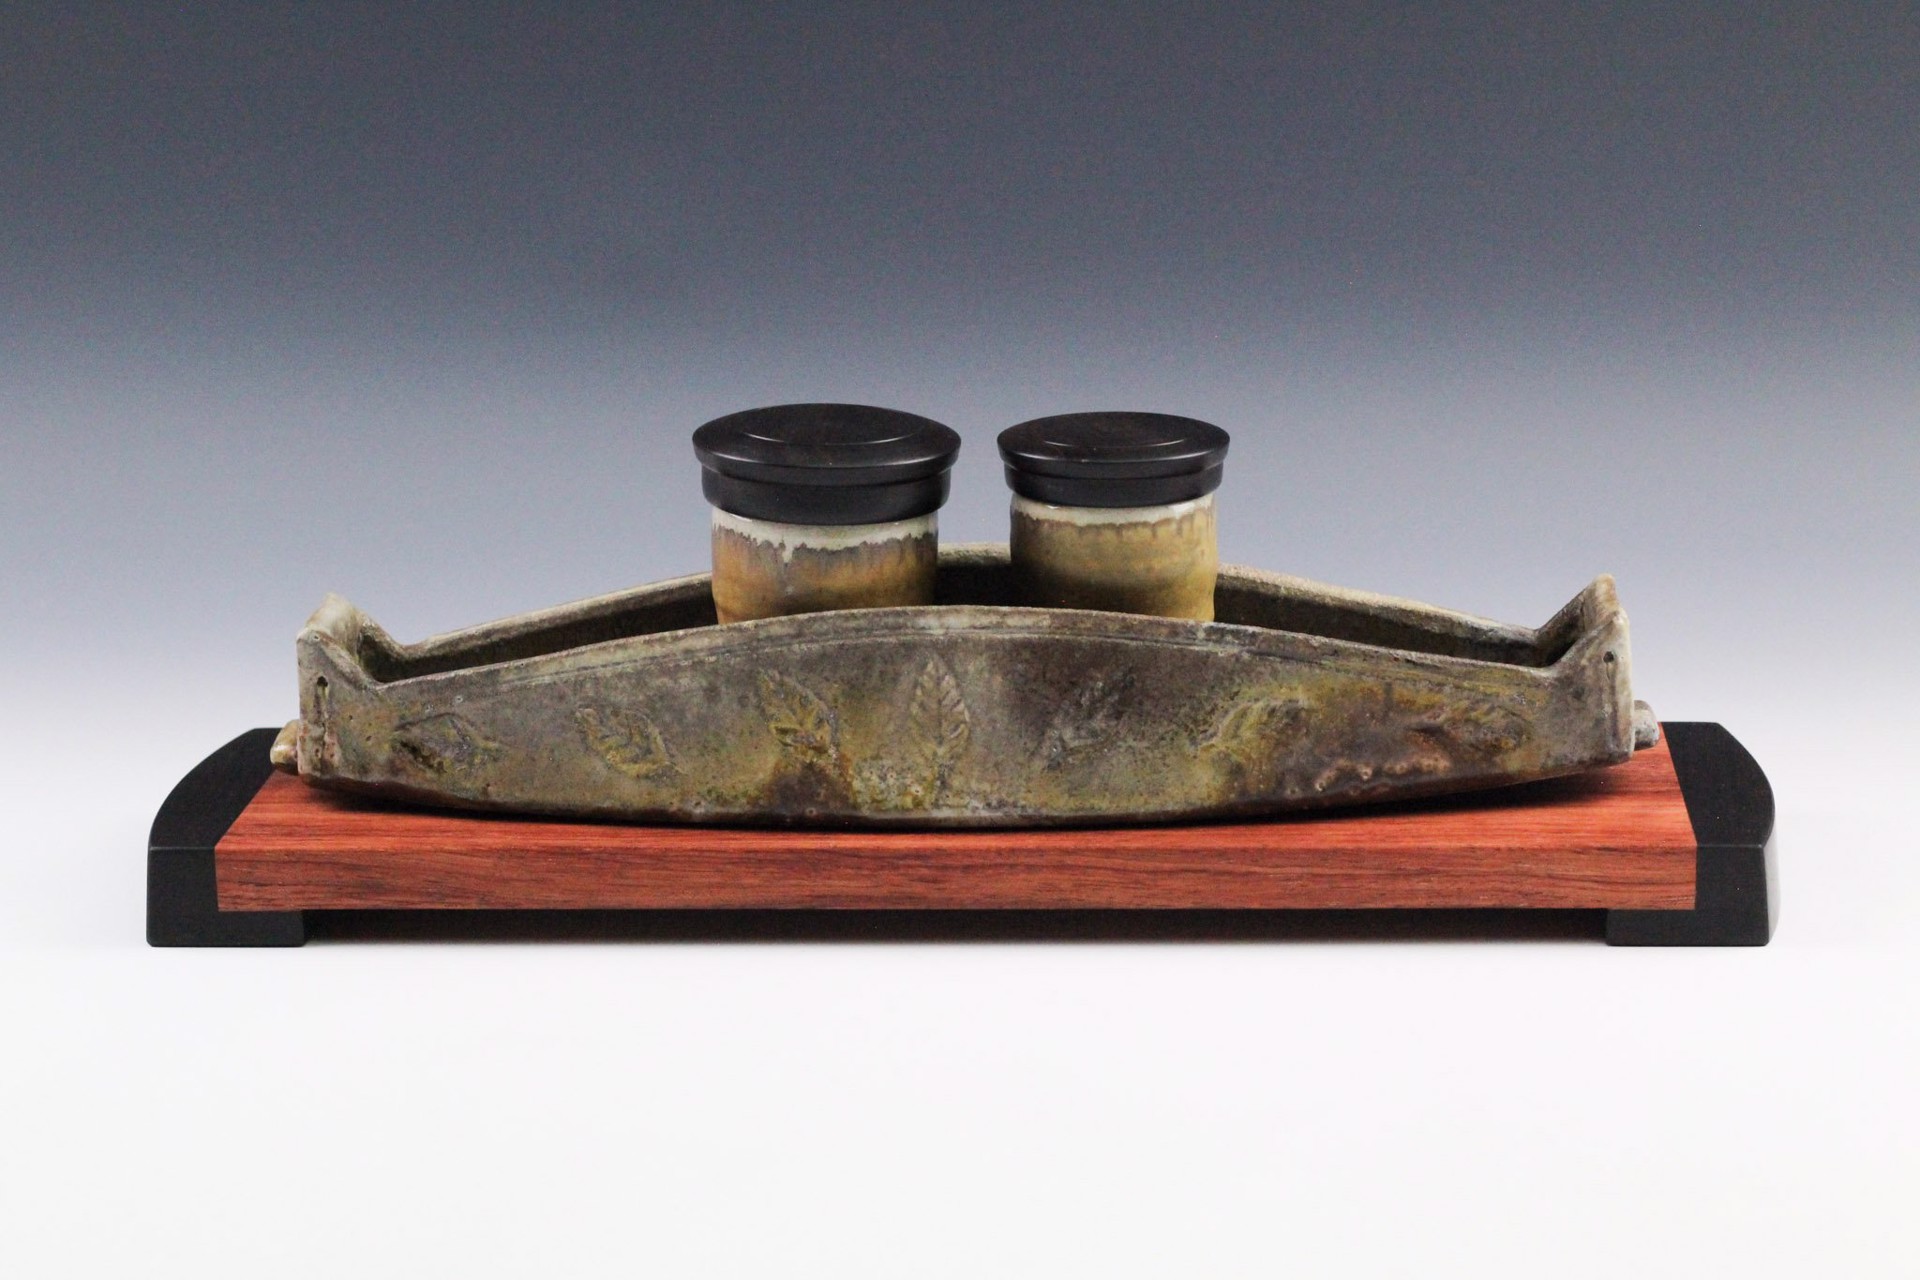 Sushi Boat and Sippers by Reid Schoonover